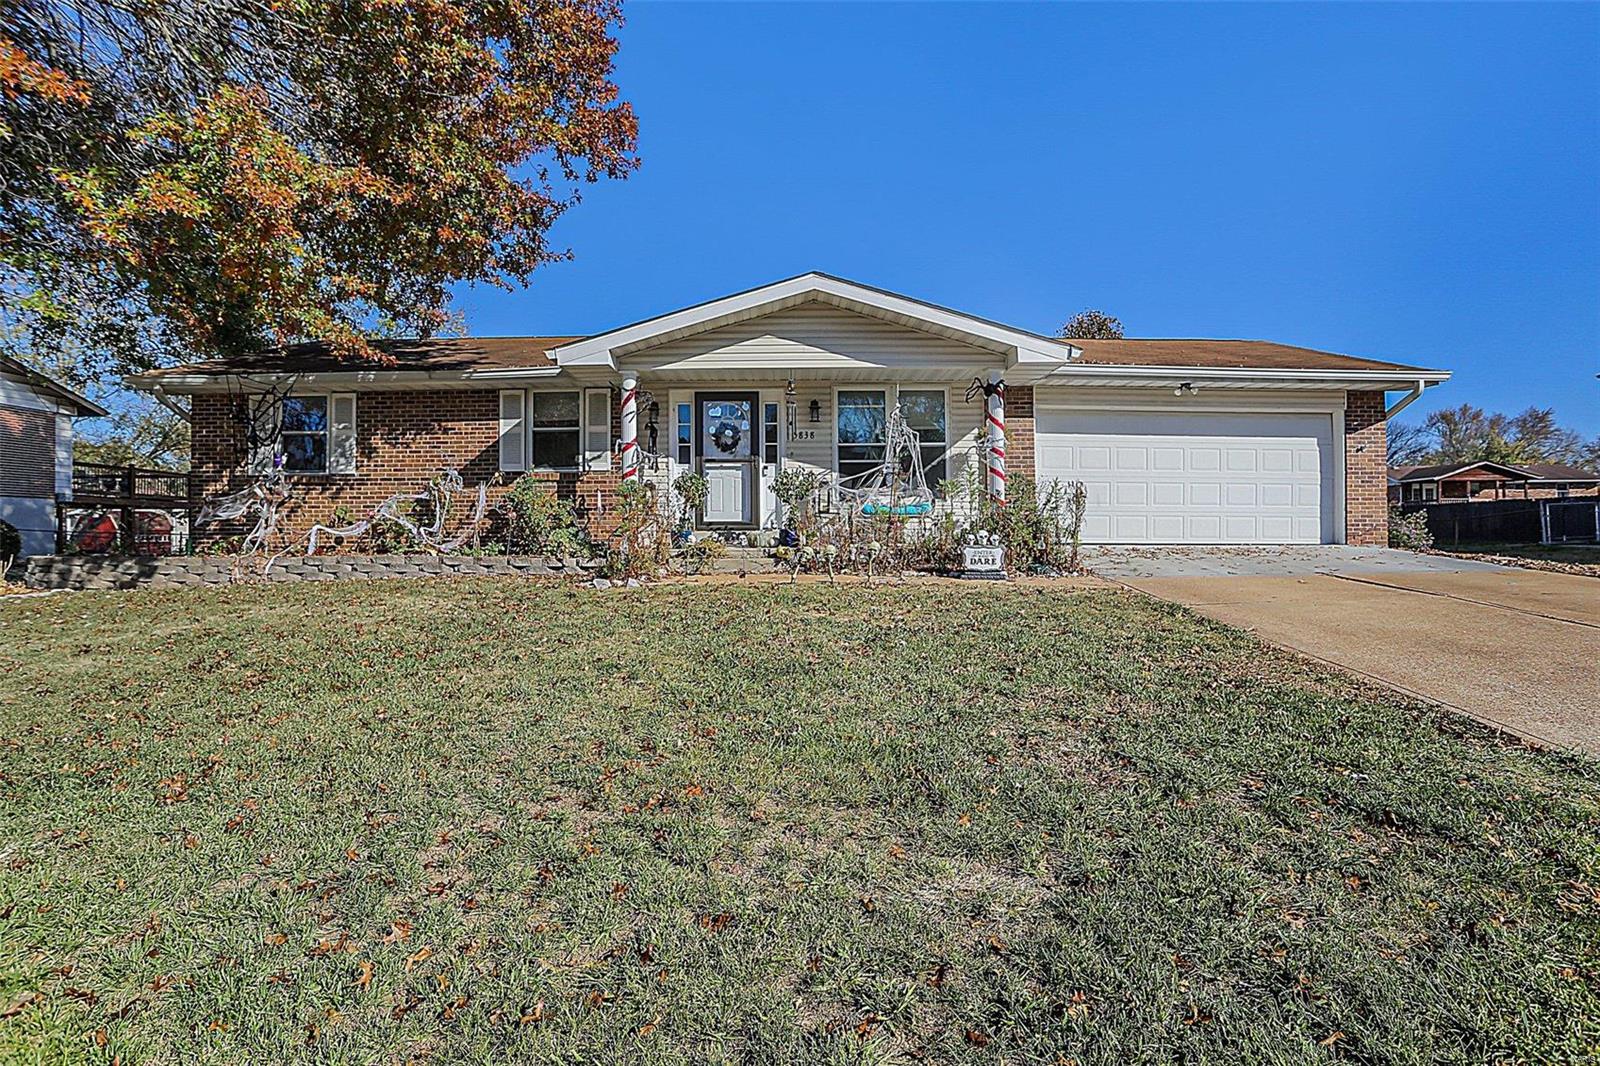 5838 Barberry Dr, Imperial, MO 63052 - MLS 22067883 - Coldwell Banker